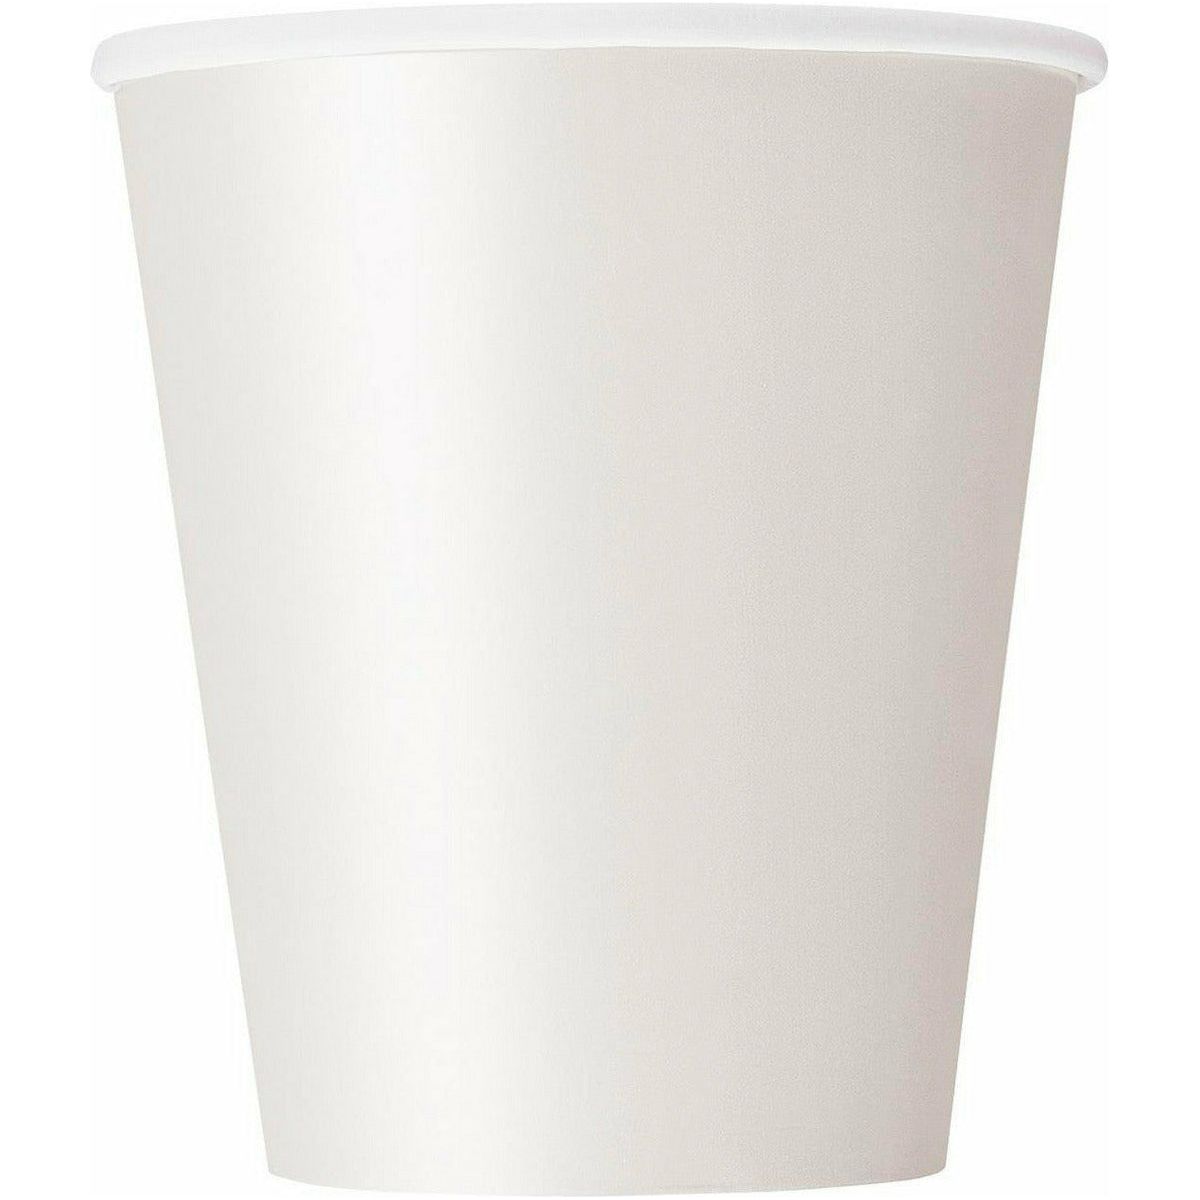 Bright White Paper Cups - 270ml 8 Pack 1 Piece - Dollars and Sense